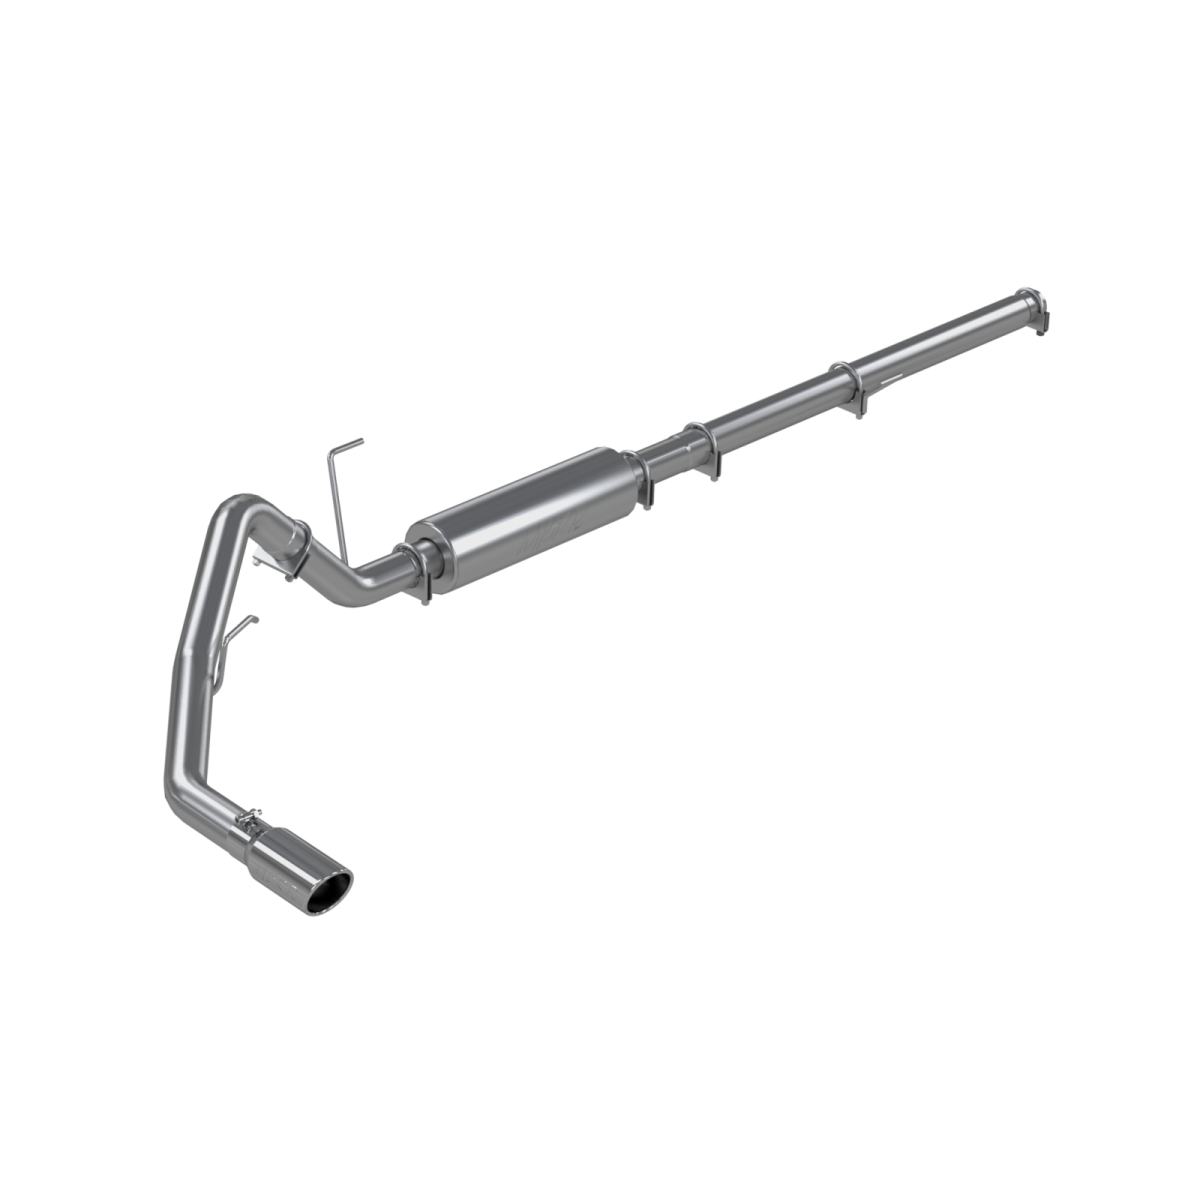 MBRP - MBRP 3 Inch Cat Back Exhaust System Single Side Aluminized Steel For 04-08 Ford F-150 4.6/5.4L Extended Cab/Crew Cab Short Bed S5200AL